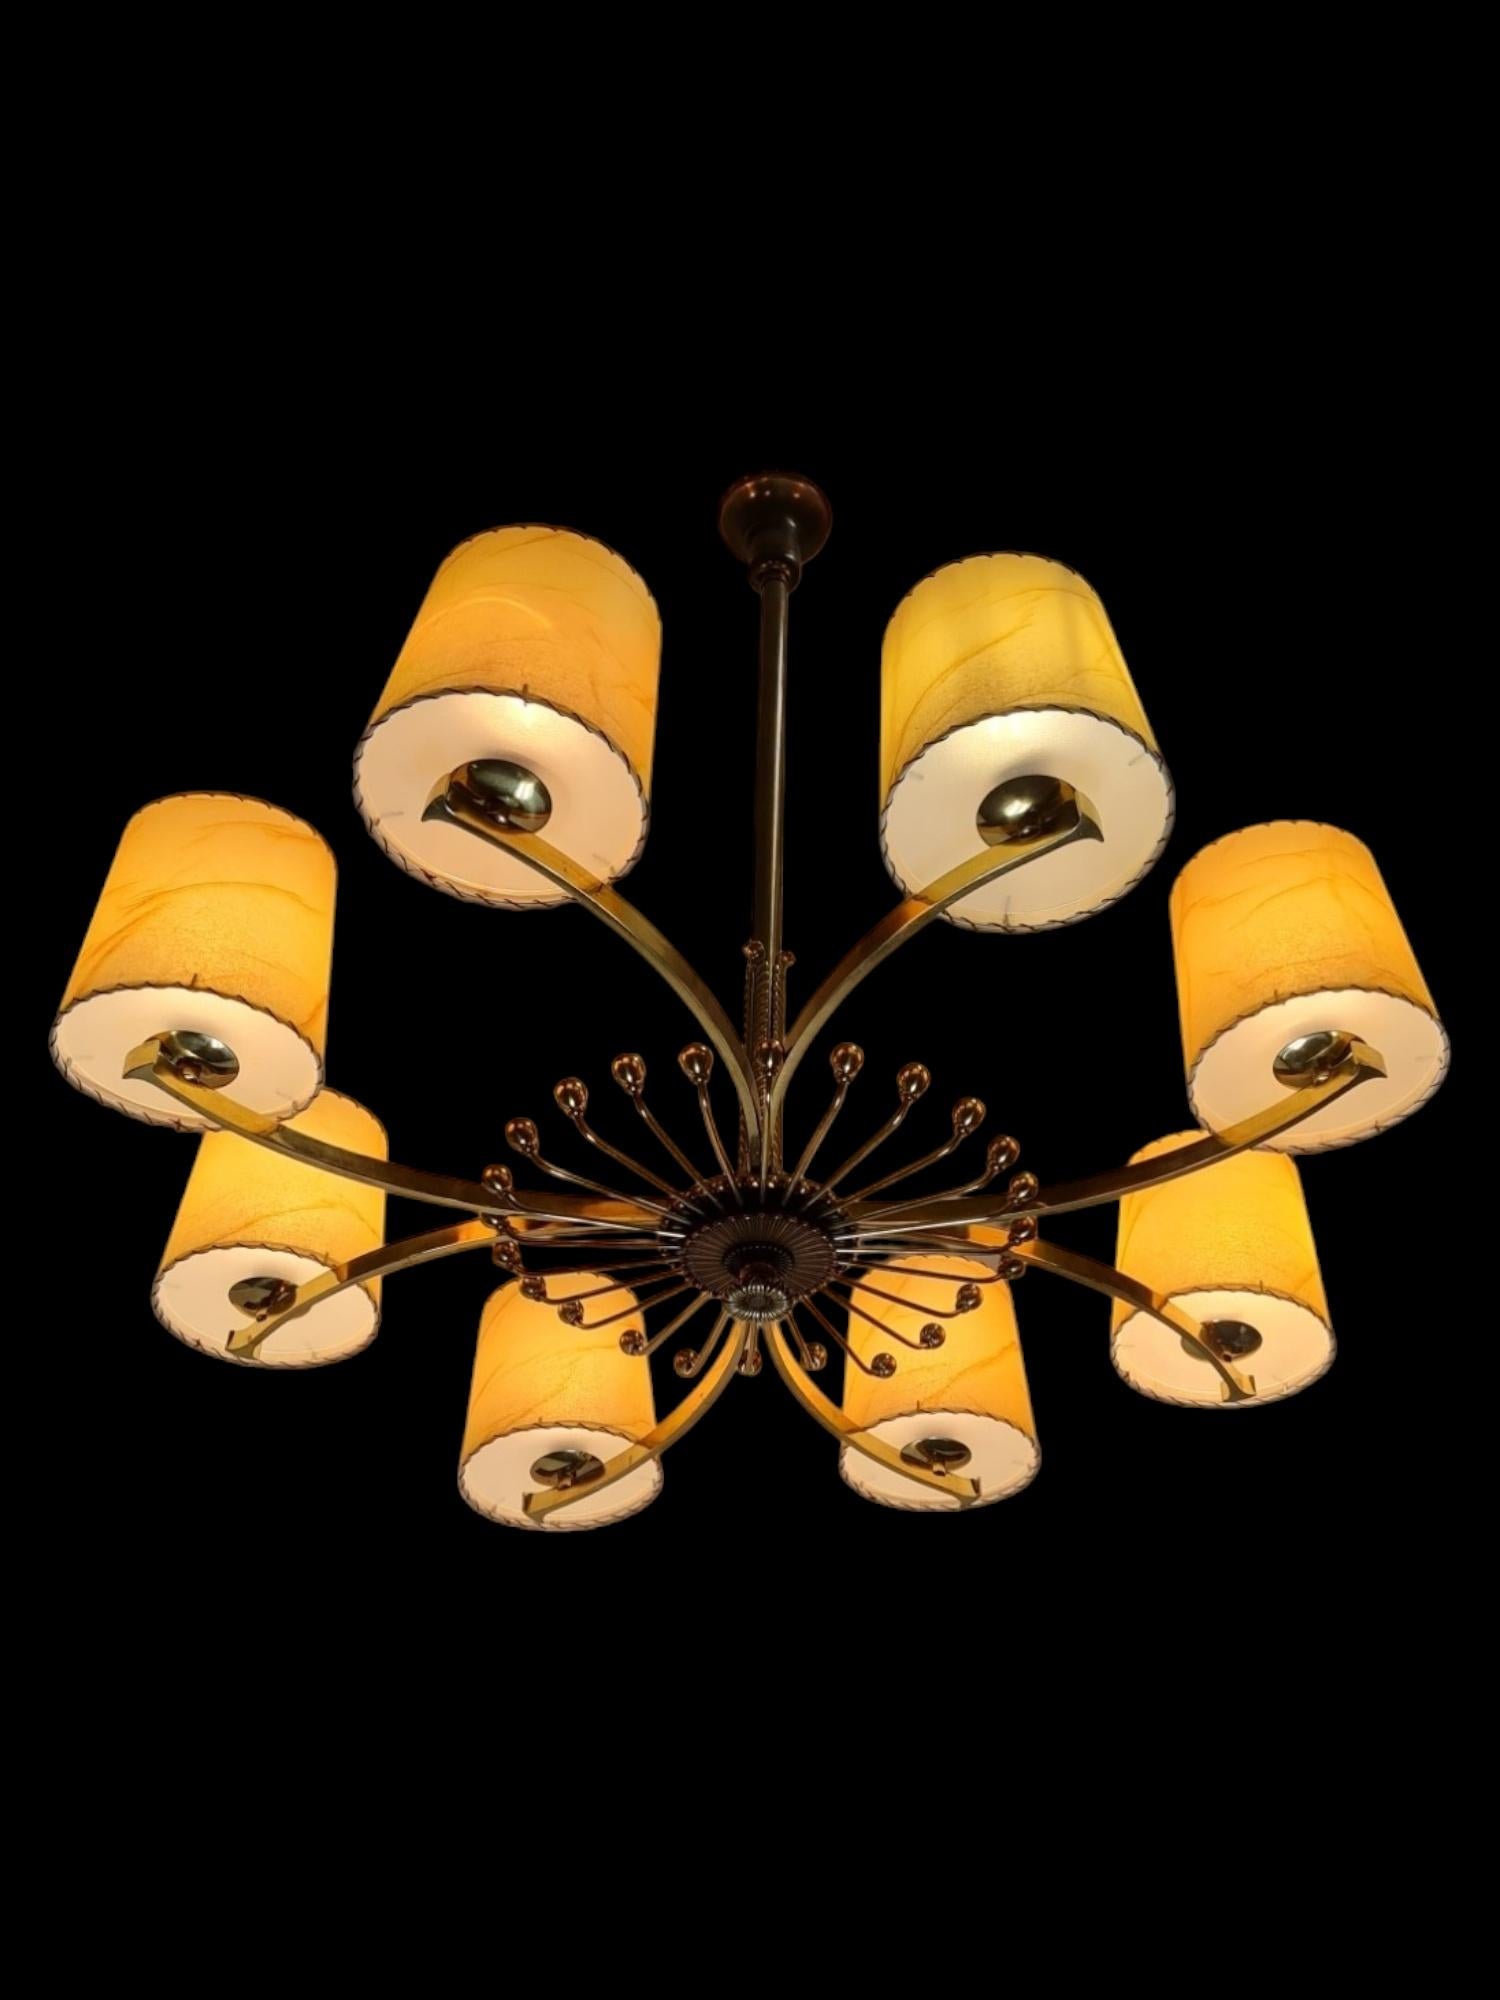 Scandinavian Modern Paavo Tynell Commissioned Ceiling Lamp, Taito Oy 1930s For Sale